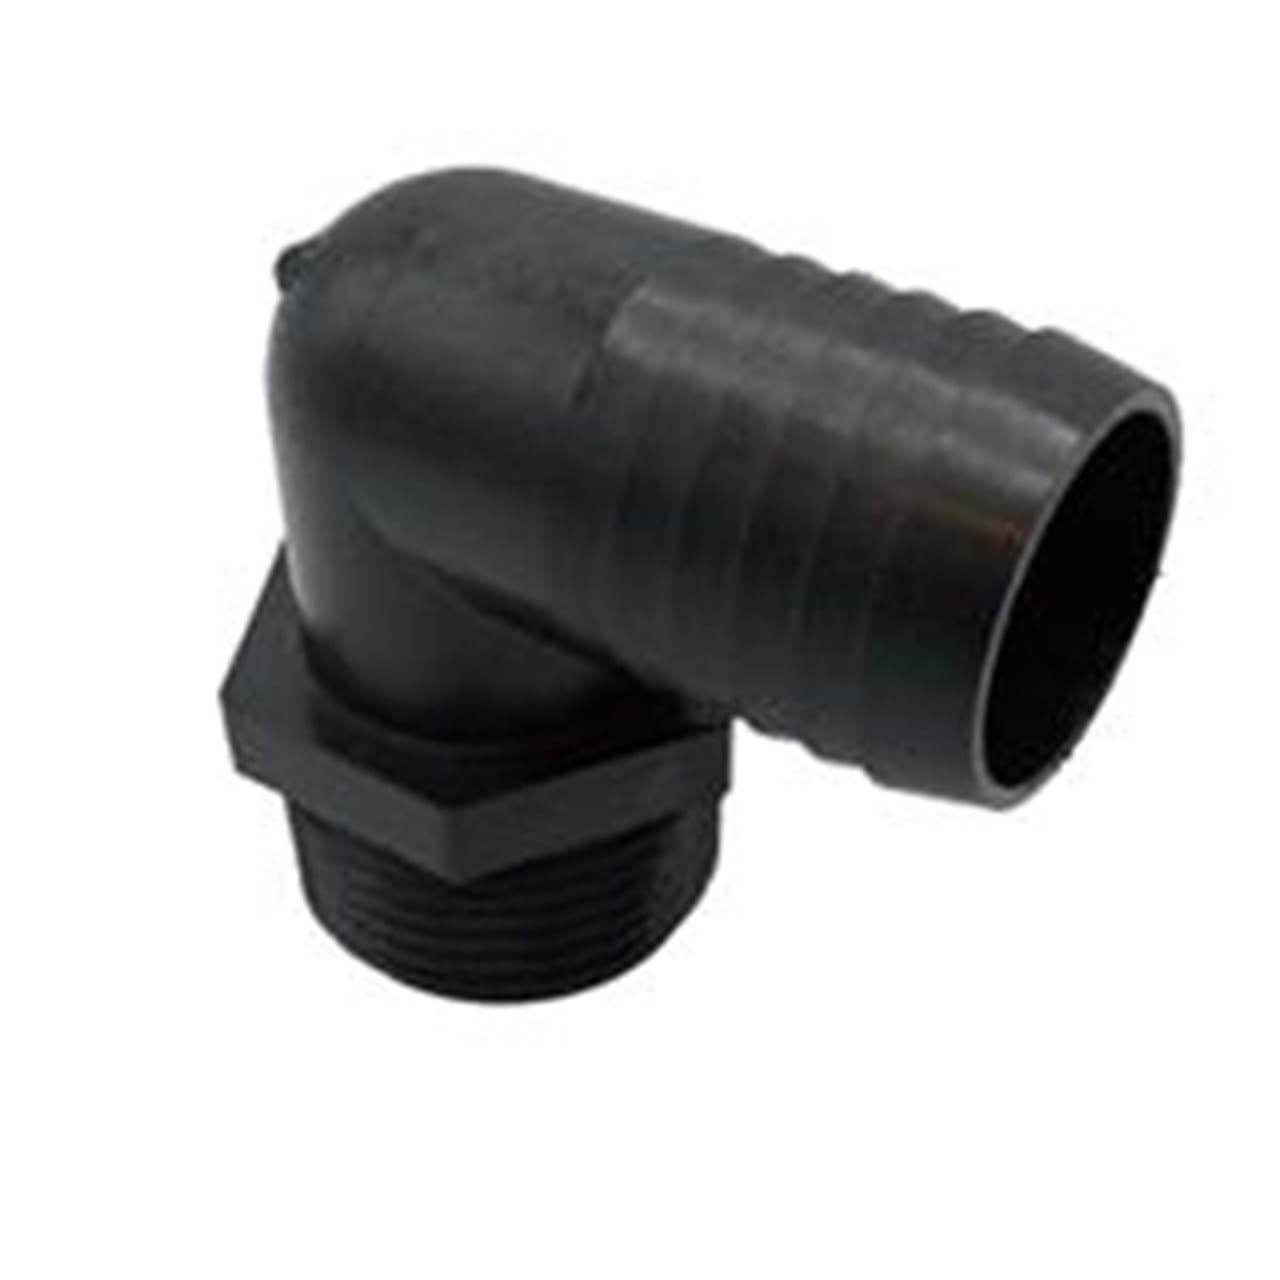 PVC Poly Plastic 90 Degree Elbow Hose Barb with Male NPT Pipe Thread